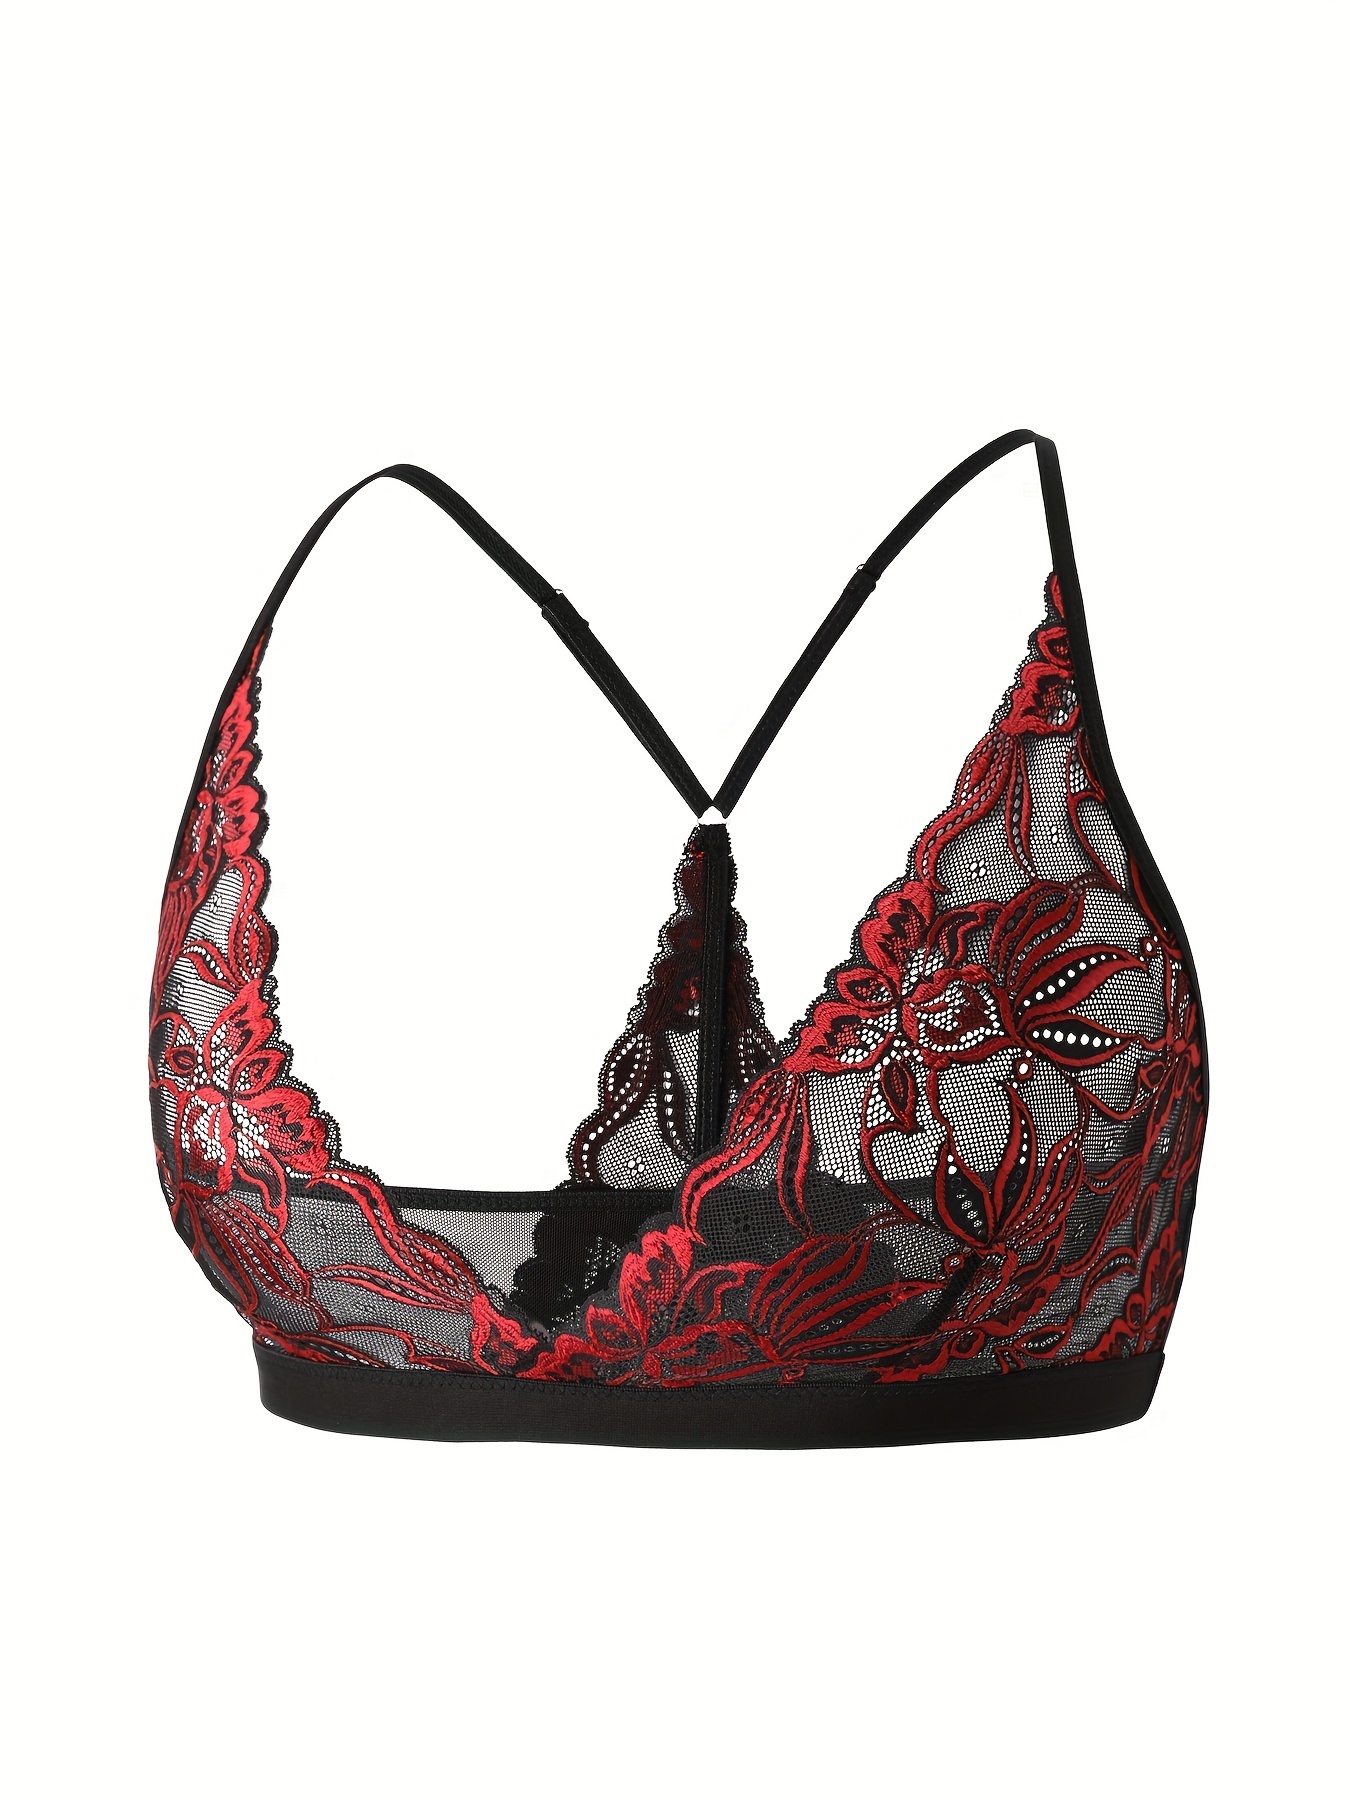 Plus Size Sexy Bralette Lingerie for Women Floral Sheer Lace